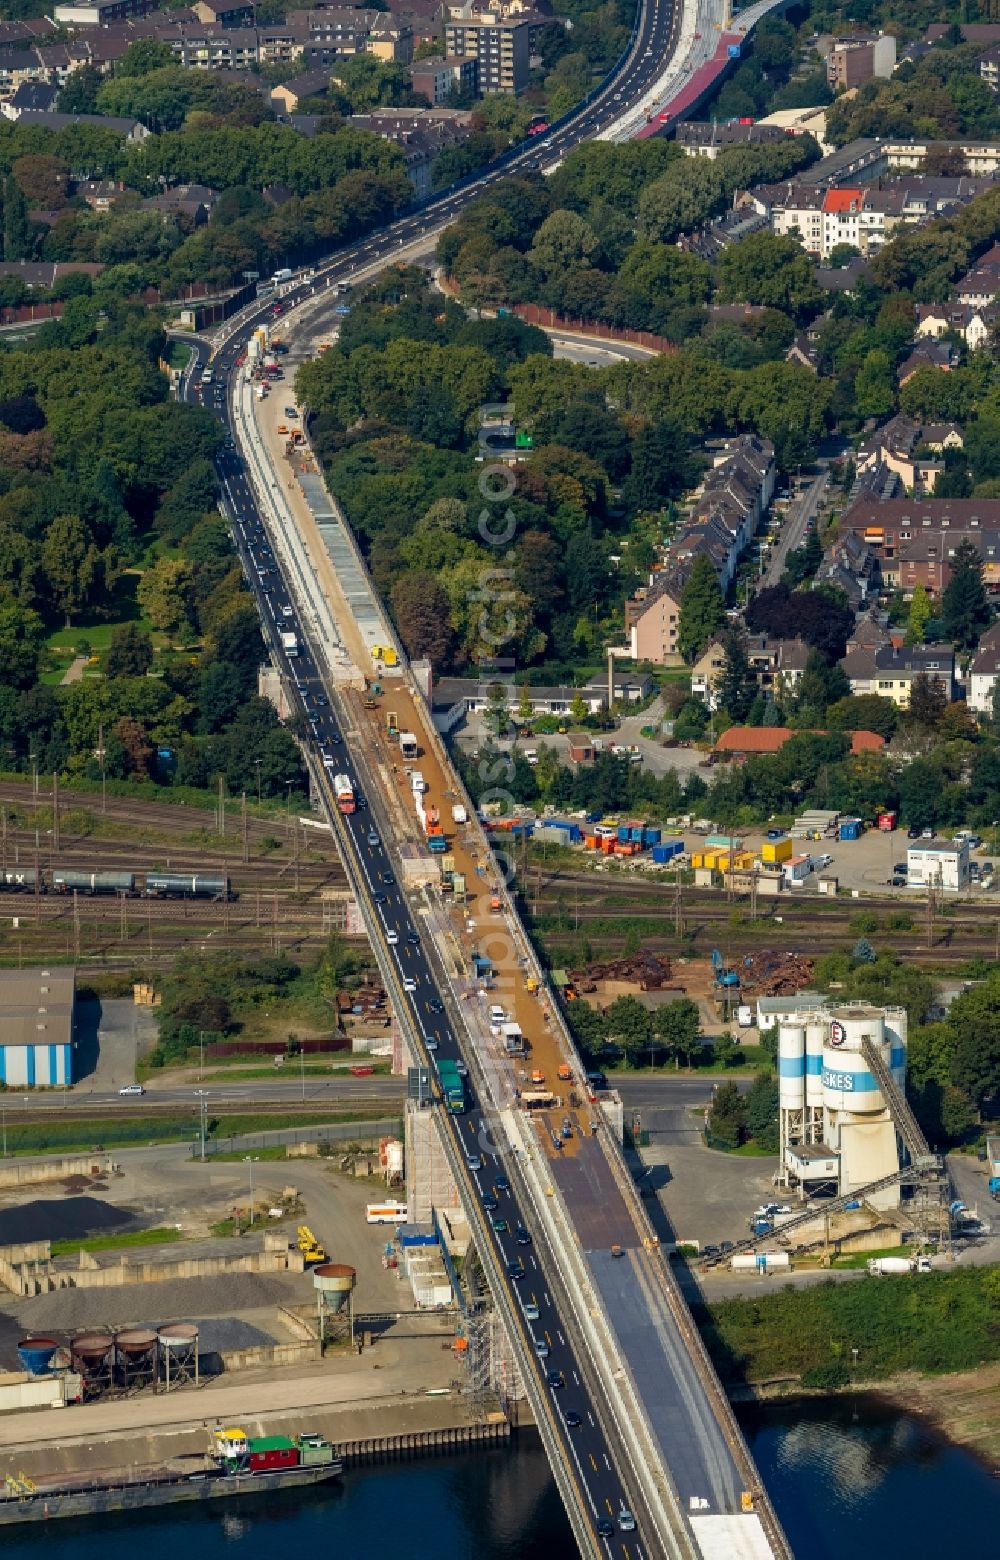 Aerial image Duisburg - Construction site of Building of the Berlin bridge the federal highway BAB A59 over the Rhine-Herne Canal and the Ruhr in Duisburg in North Rhine-Westphalia